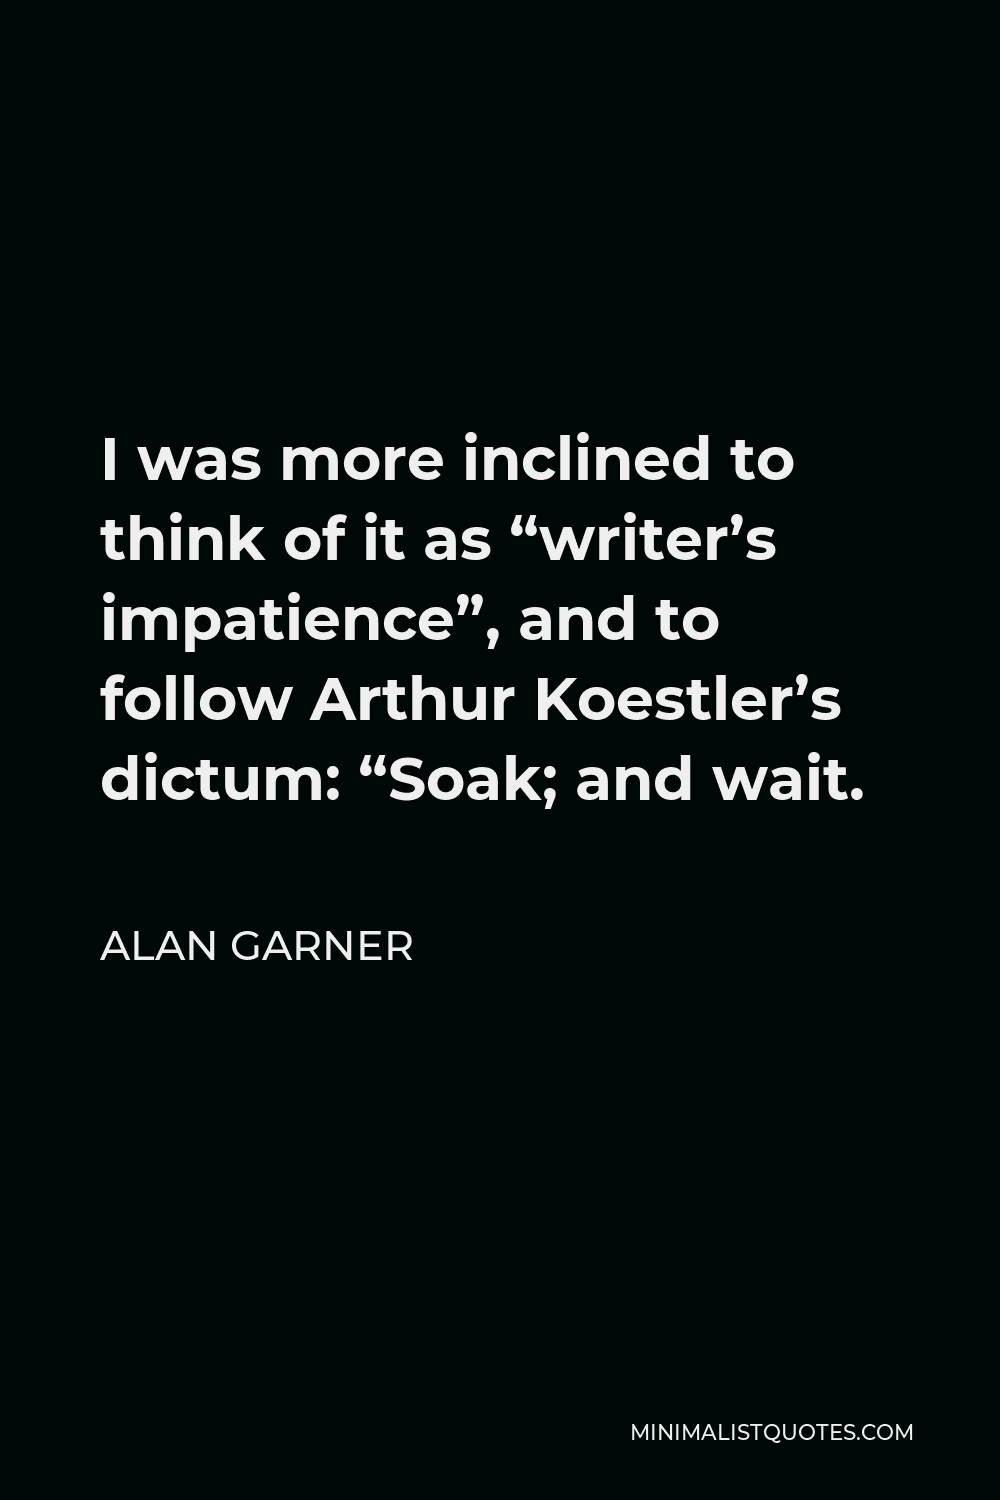 Alan Garner Quote - I was more inclined to think of it as “writer’s impatience”, and to follow Arthur Koestler’s dictum: “Soak; and wait.